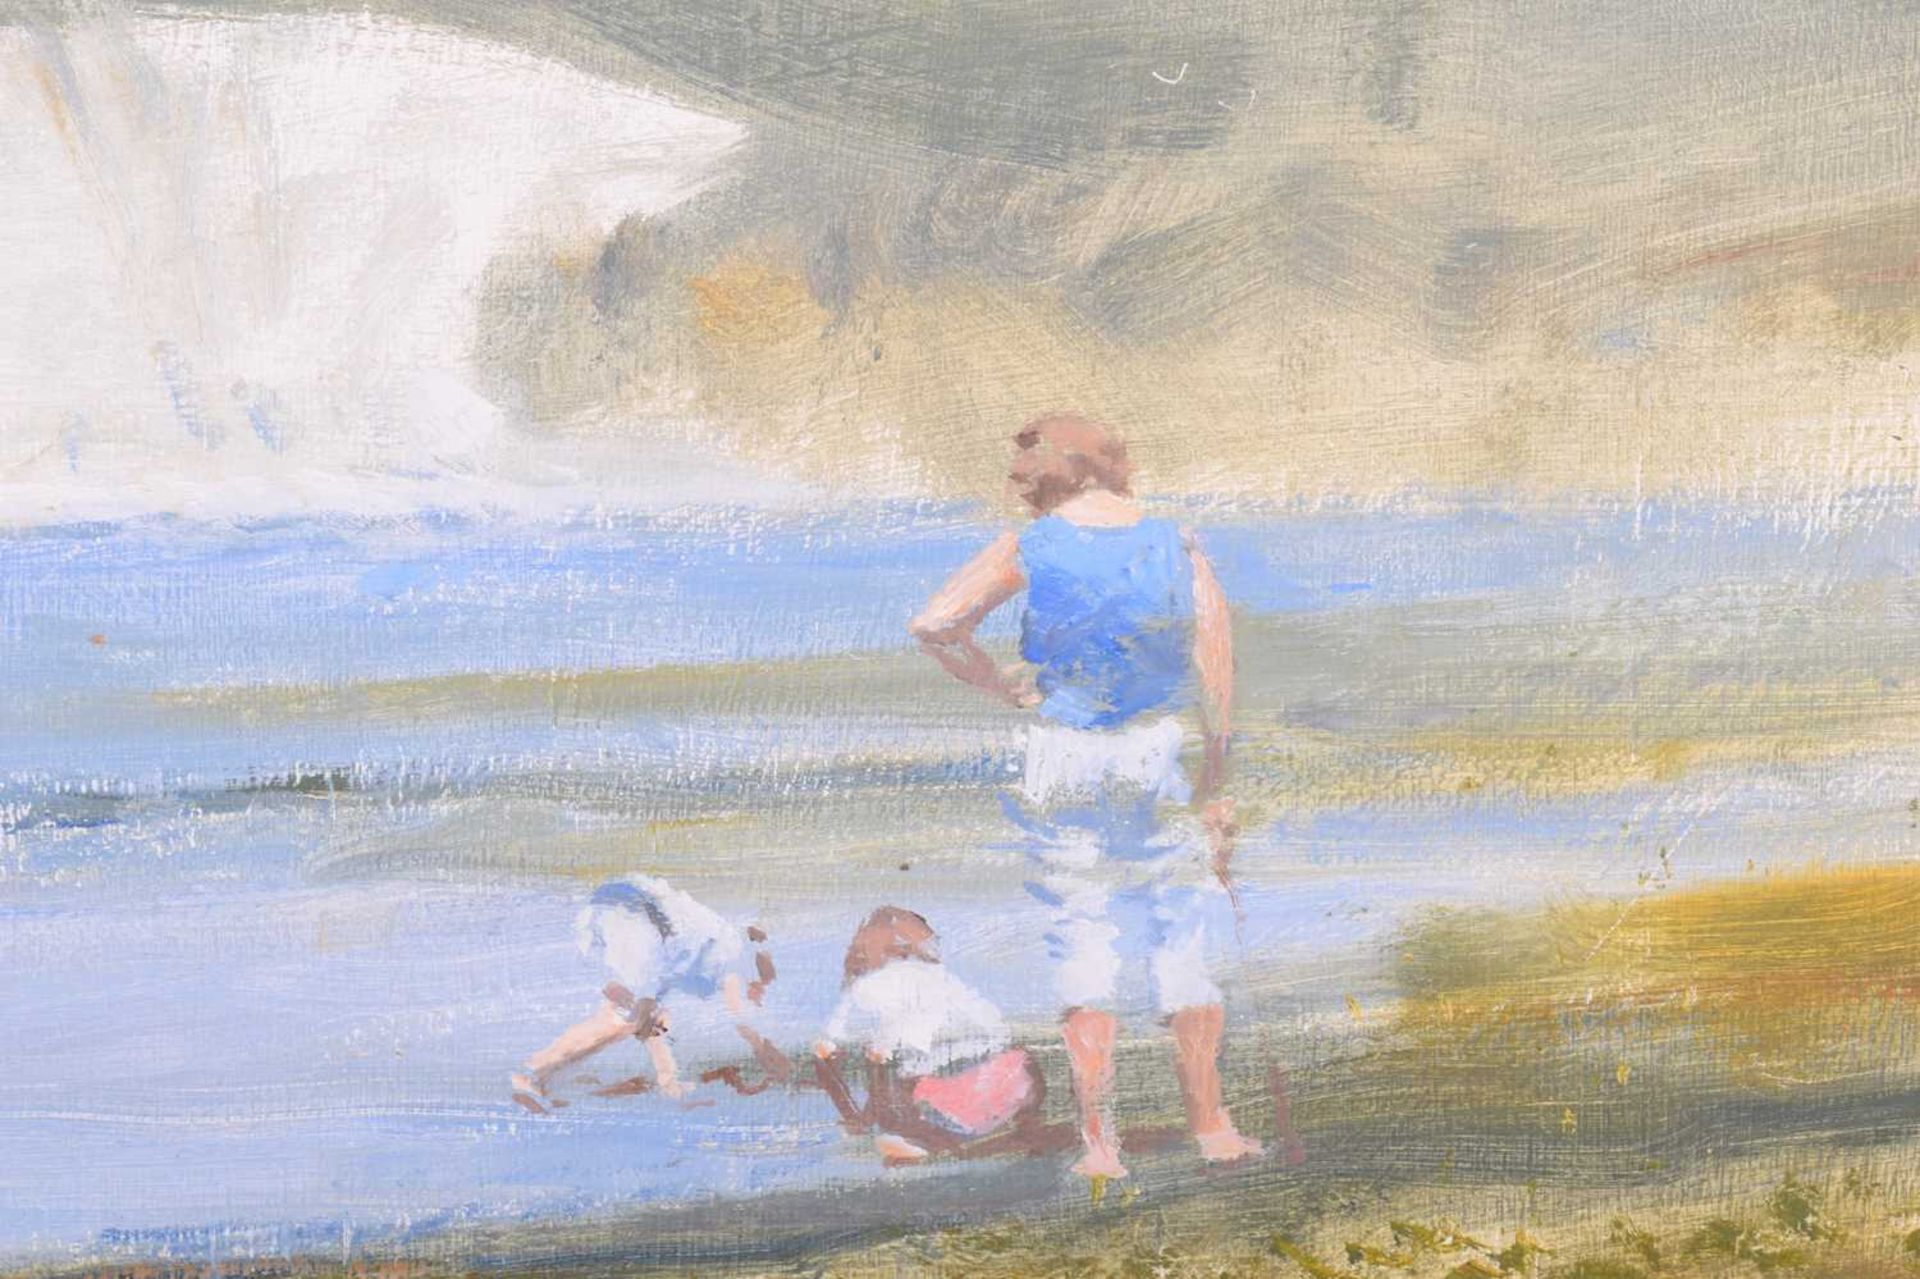 Norman R. Hepple (1908 - 1994), 'Beachtime Fun', signed and dated 1993, oil on board, 50 x 60 cm, fr - Image 5 of 7